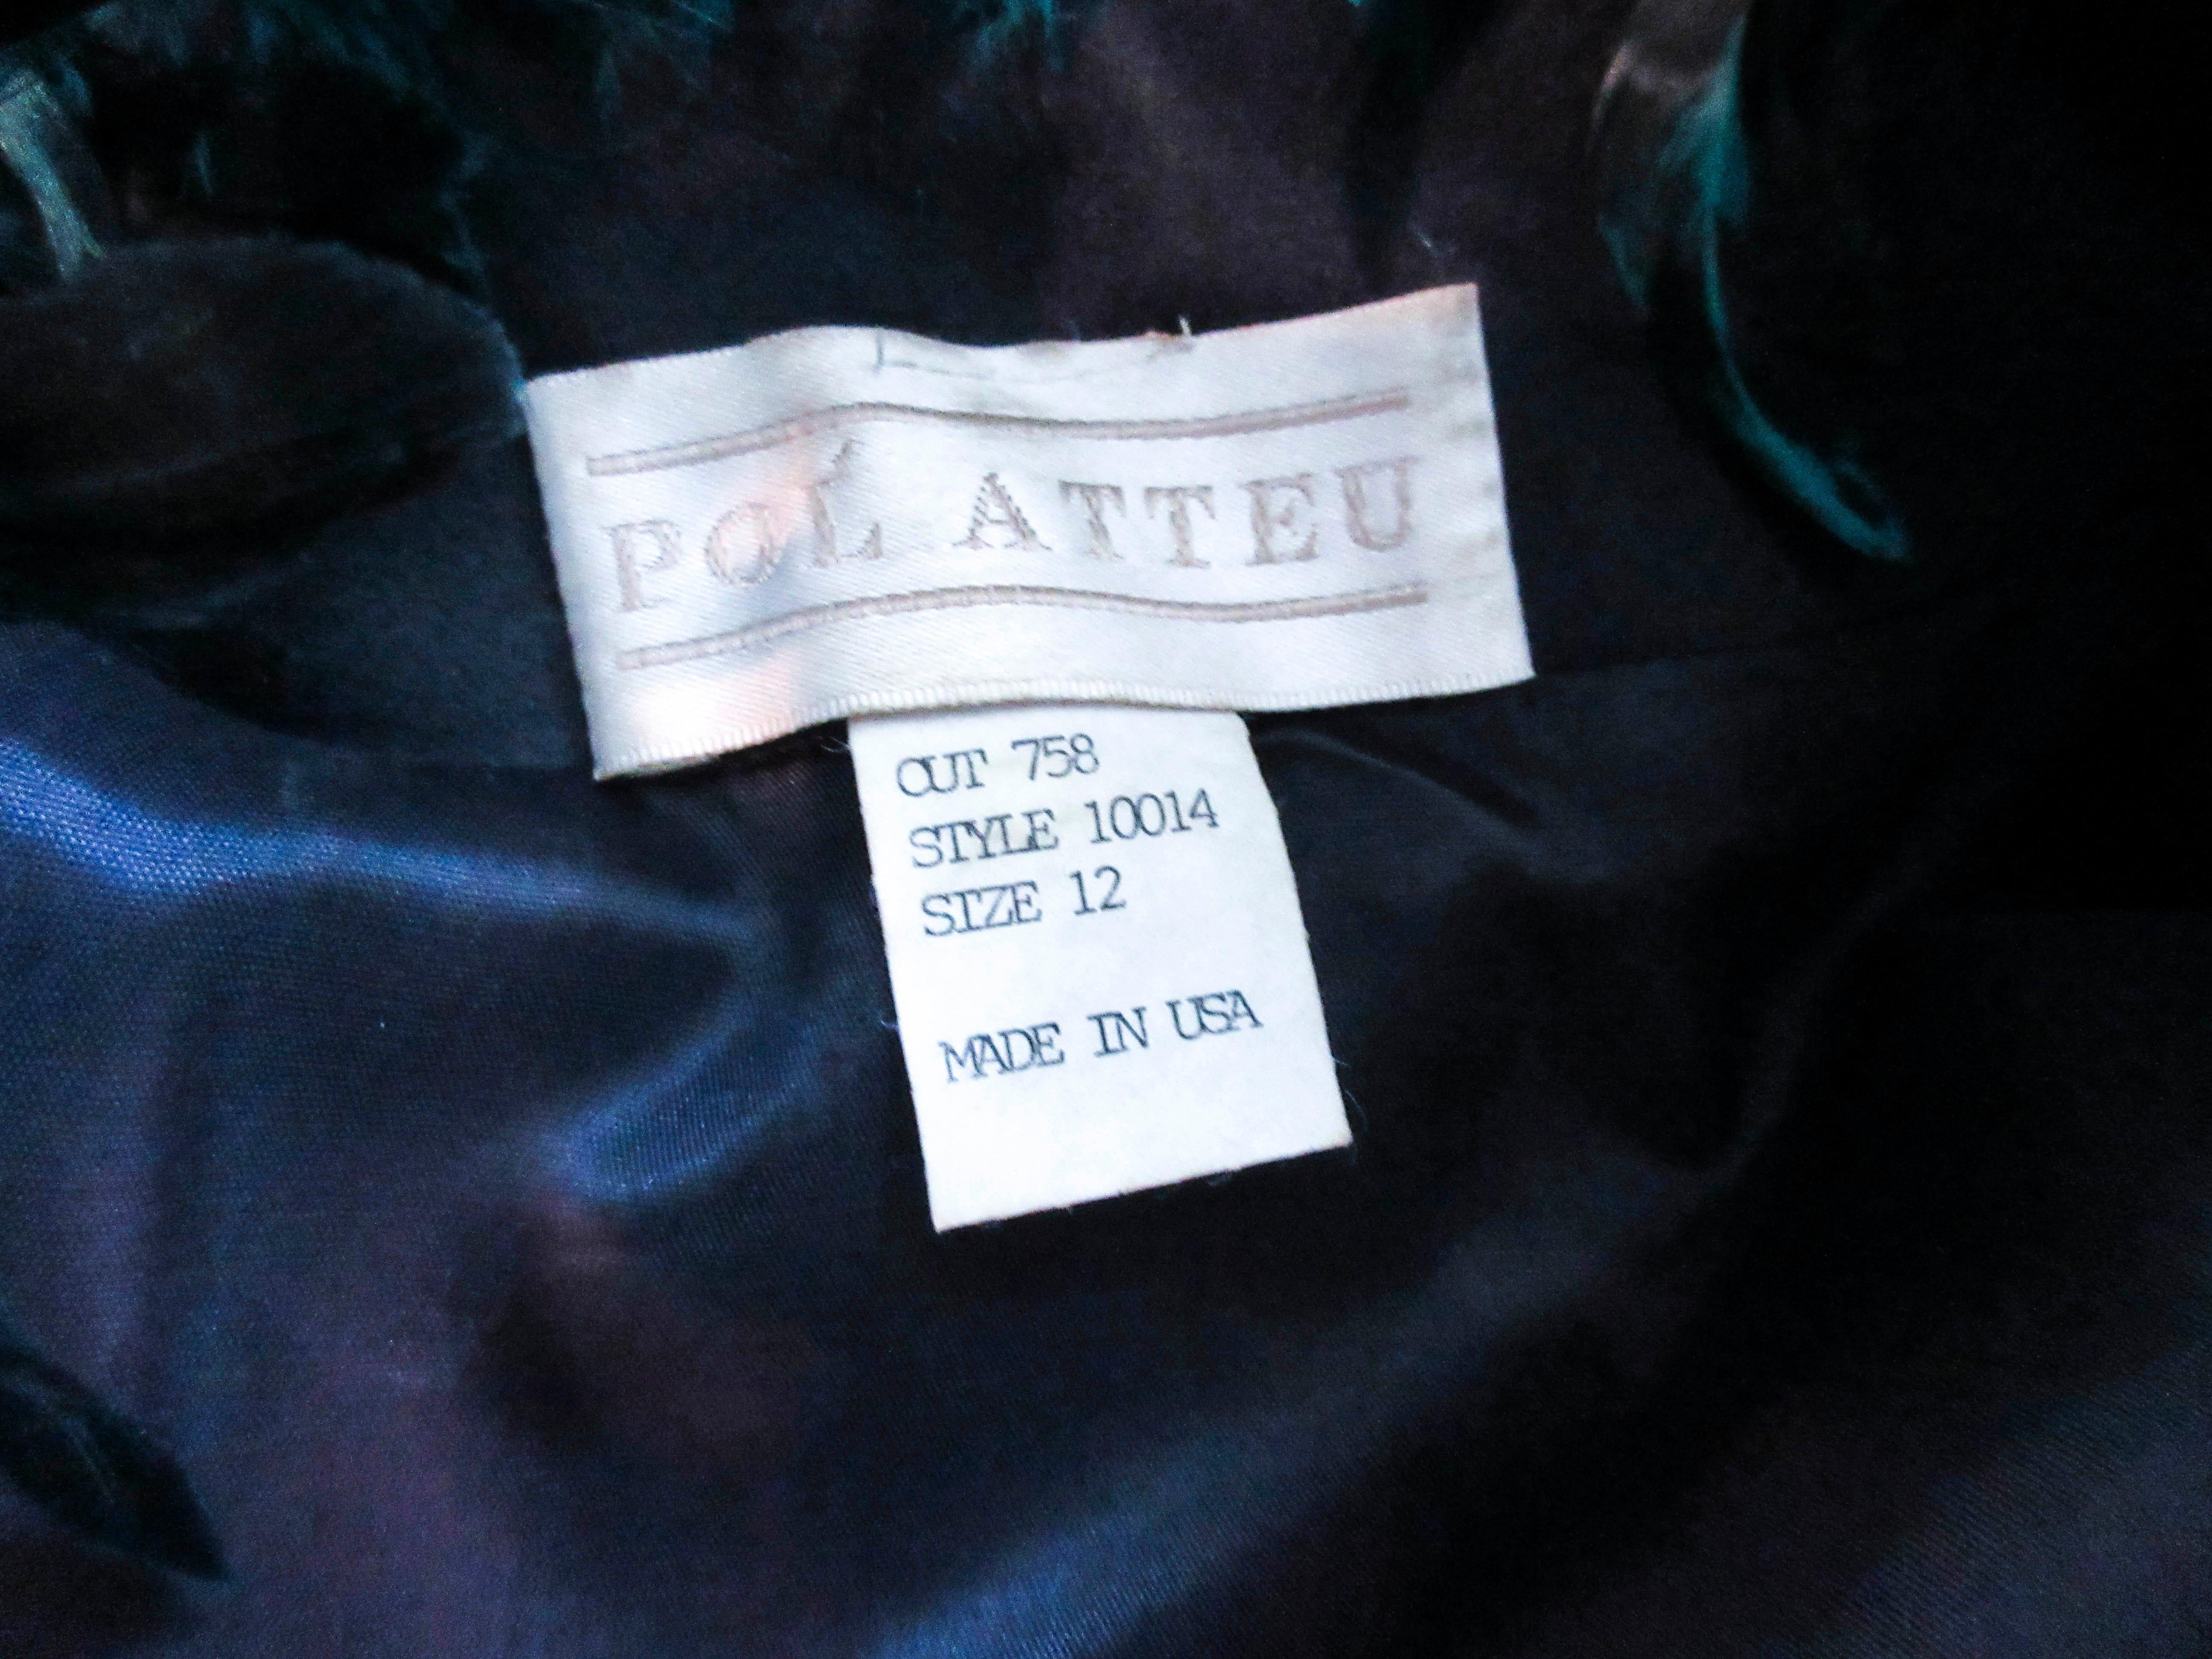 POL ATTEU Satin Evening Jacket with Iridescent Feather Collar Trim Size 12 For Sale 5